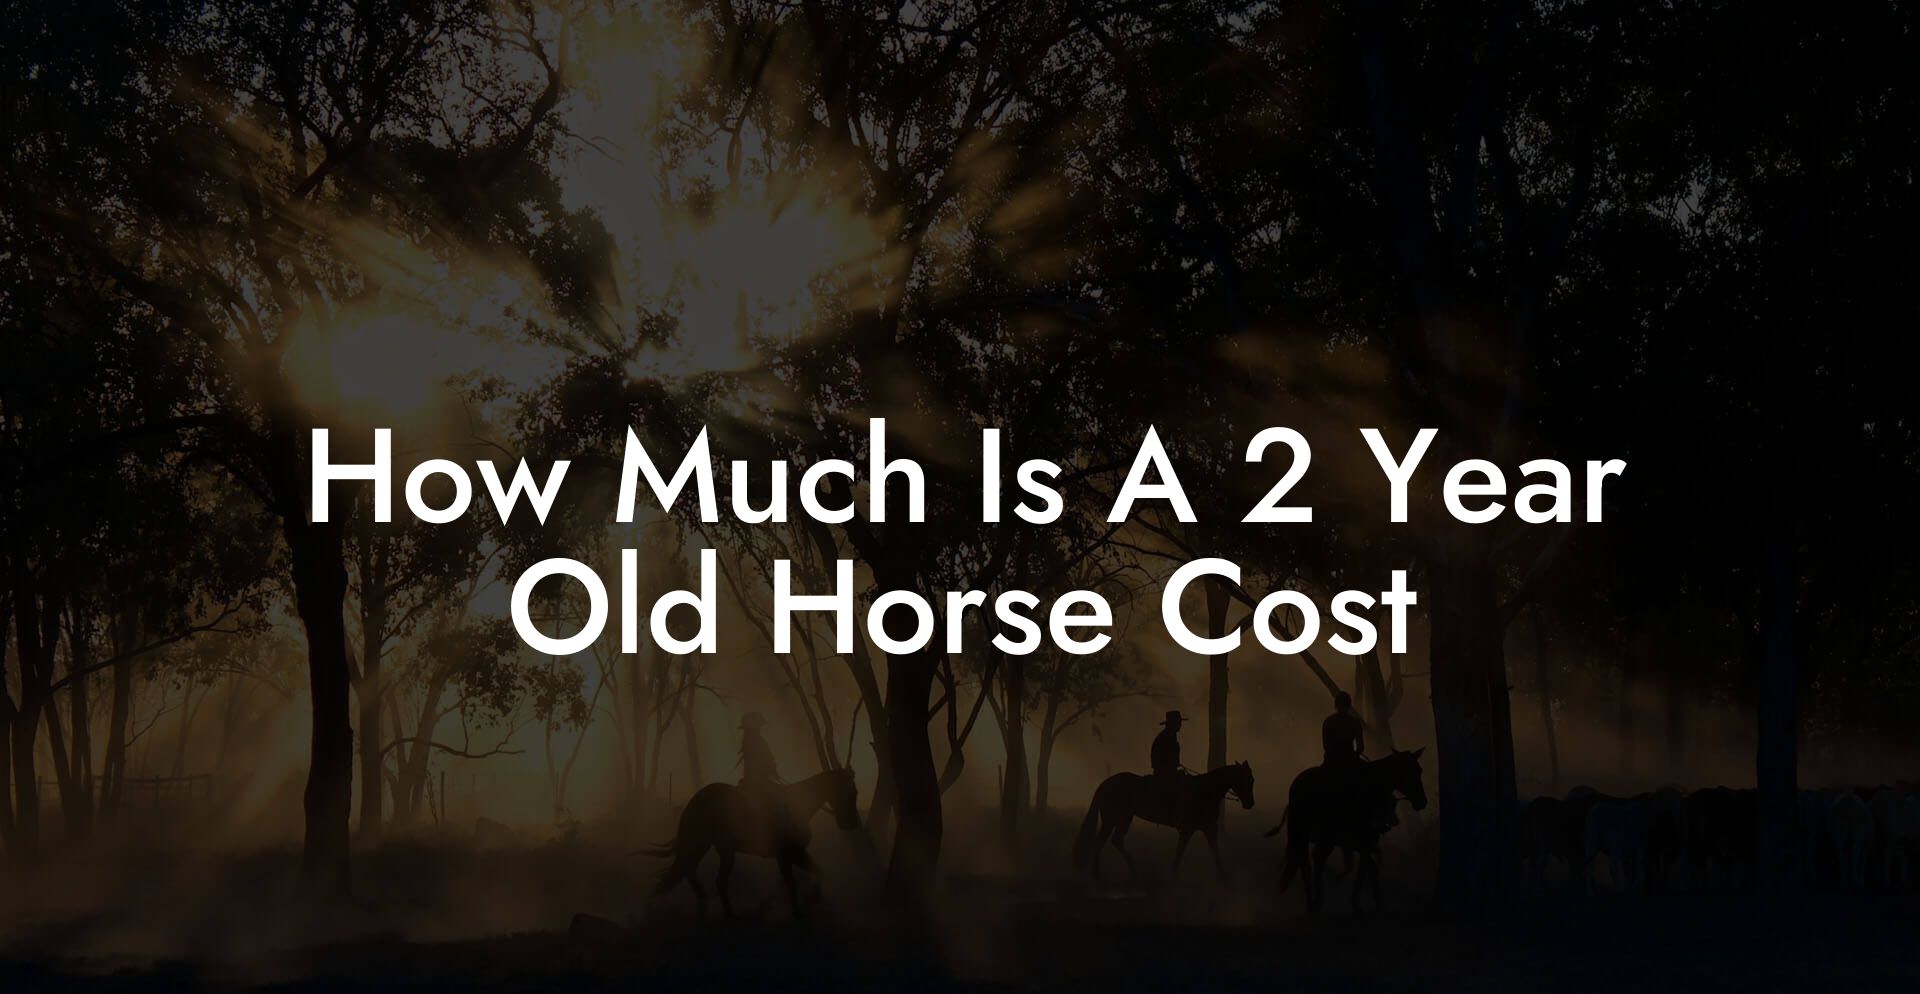 How Much Is A 2 Year Old Horse Cost